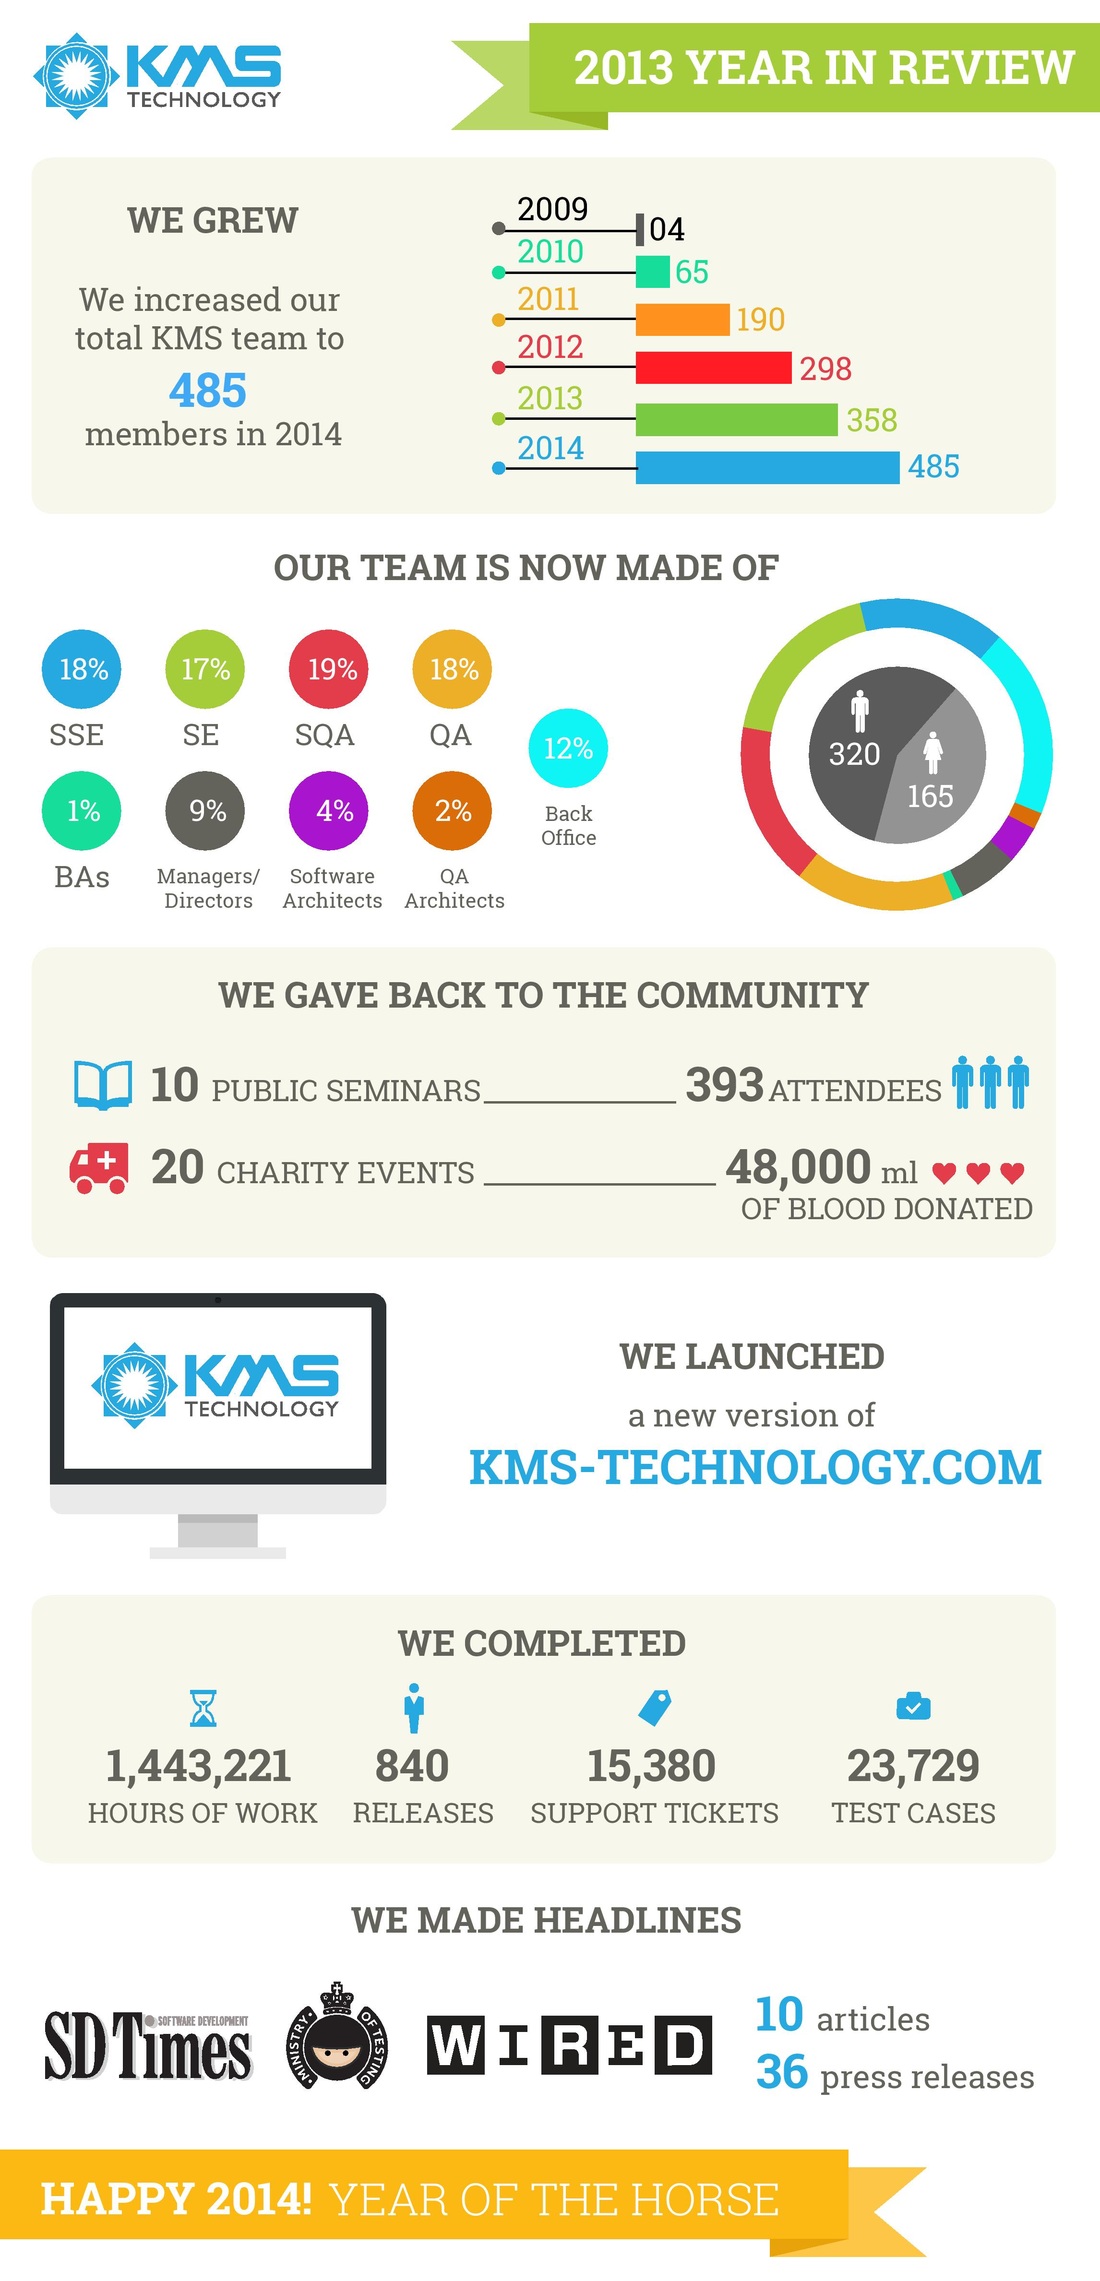 KMS Technology - 2013 Year In Review | KMS Technology